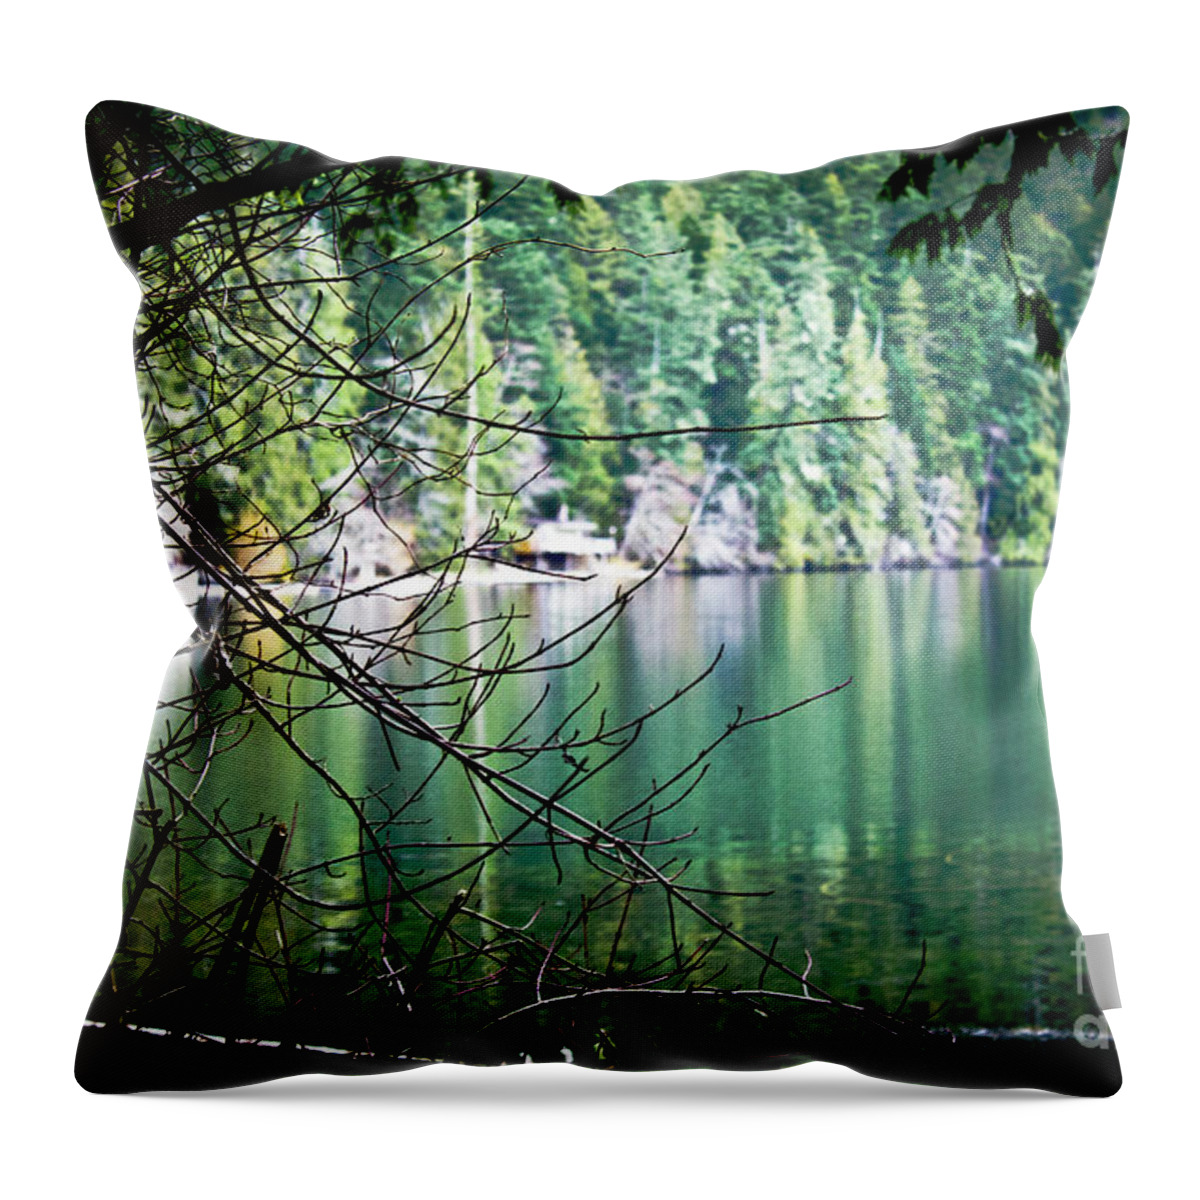 Vancouver Island Throw Pillow featuring the photograph Lake Cathedral Grove by Donna L Munro